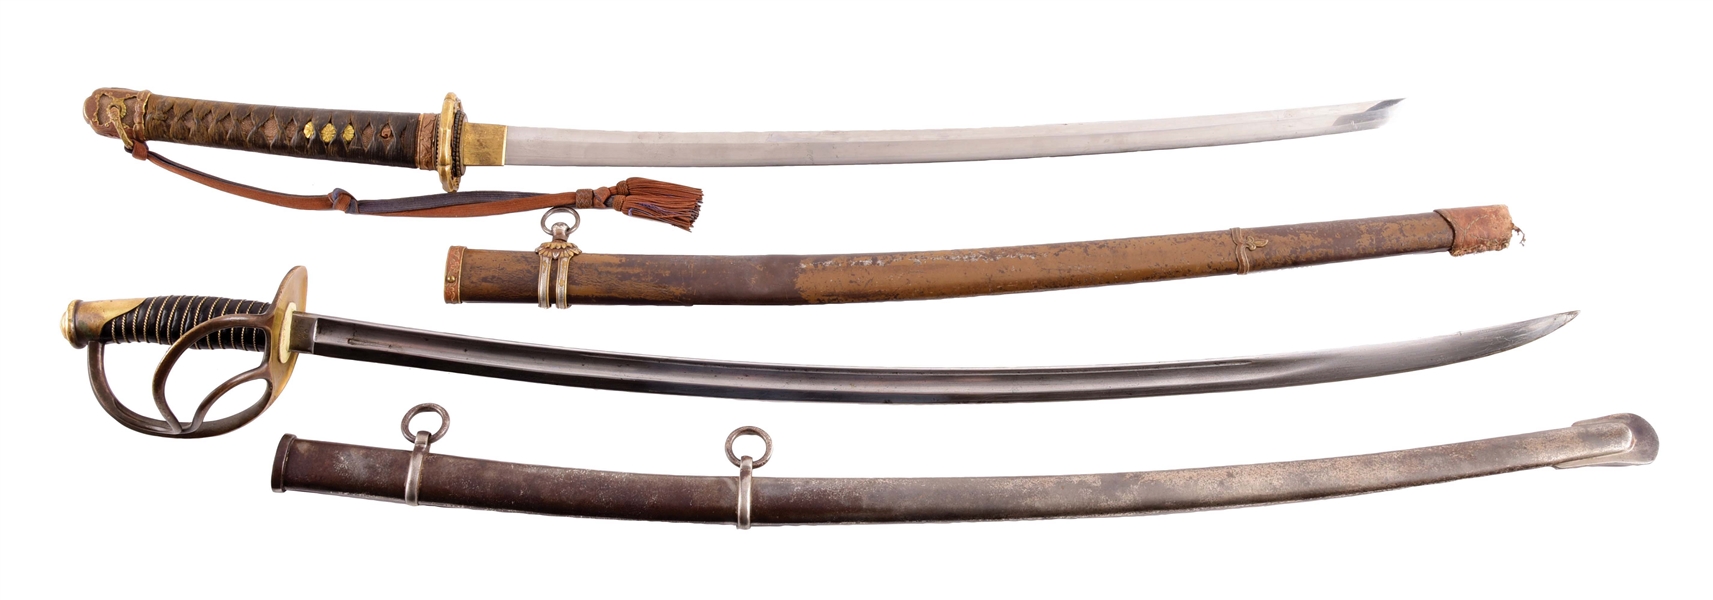 LOT OF 2: JAPANESE SAMURAI SWORD AND US 1860 CAVALRY SABER. 